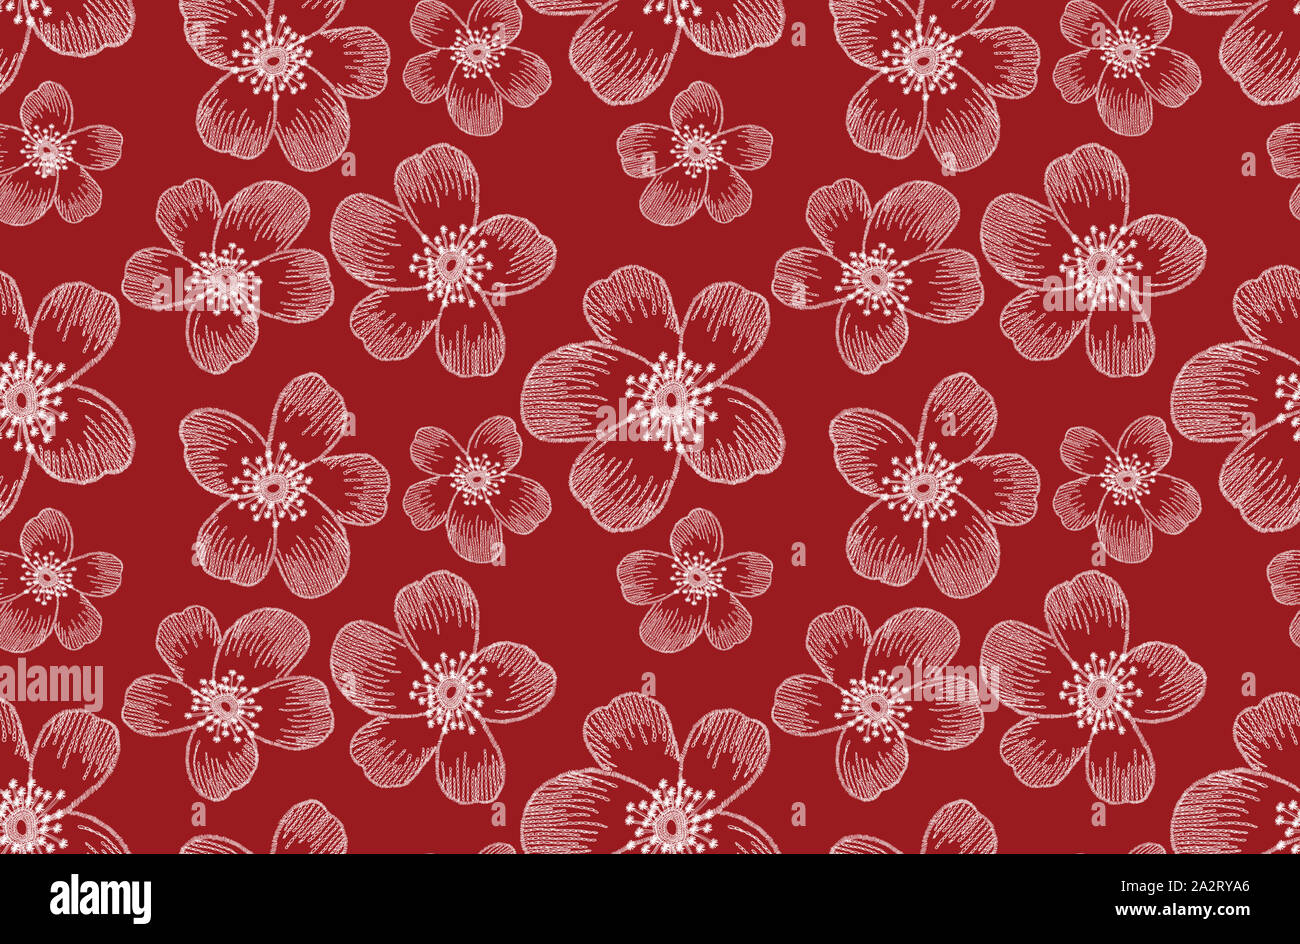 Seamless embroidery flowers pattern. Fashion art template for clothes, t- shirt design, textile, wallpaper, pattern fills, covers, surface, print. on  r Stock Photo - Alamy